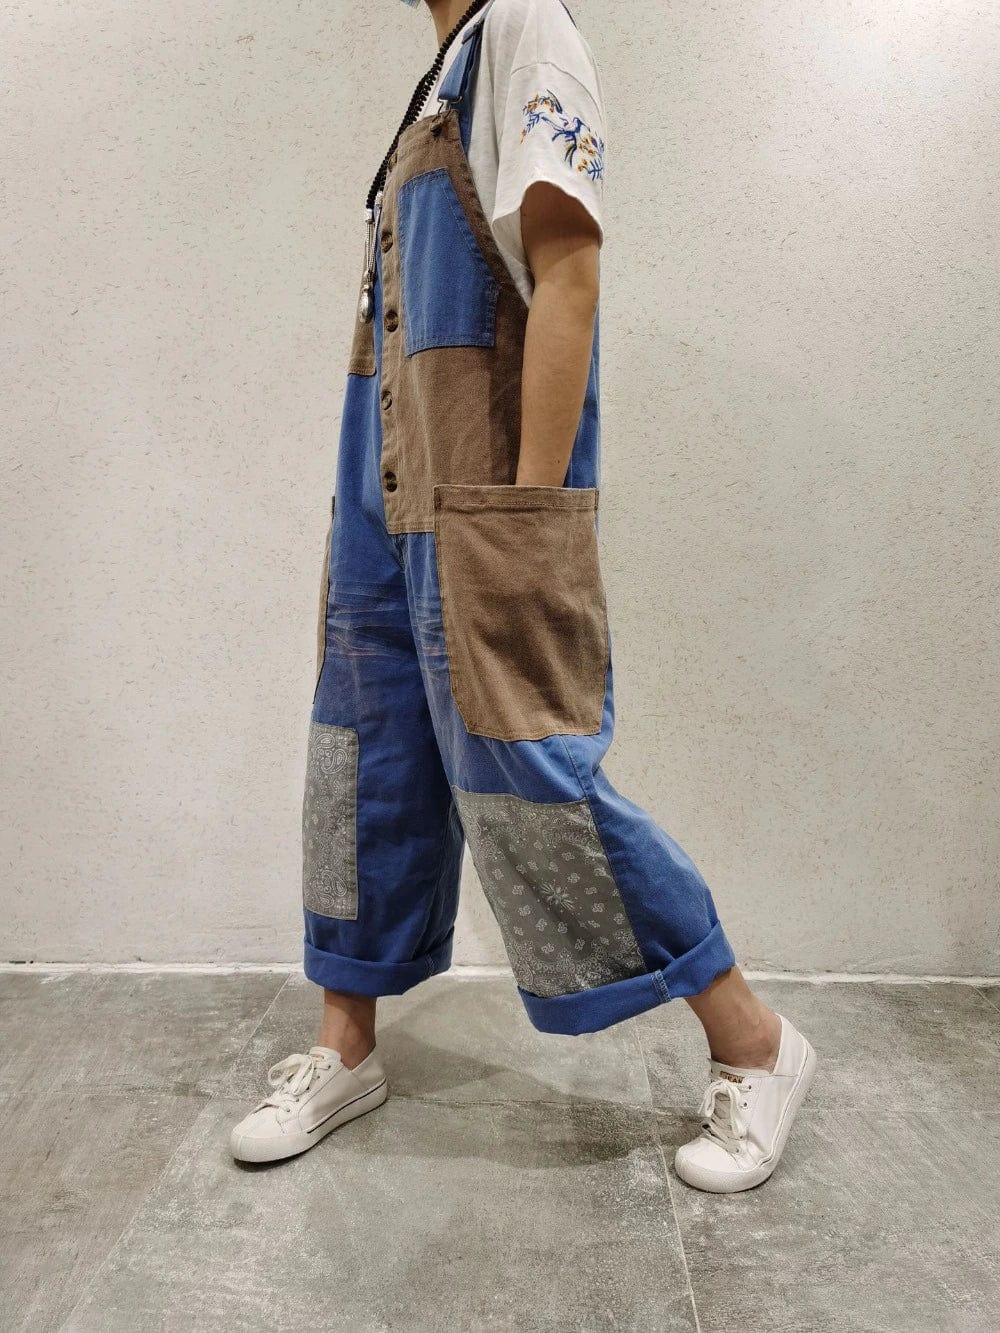 R13 D'Arcy Overalls | Shopbop